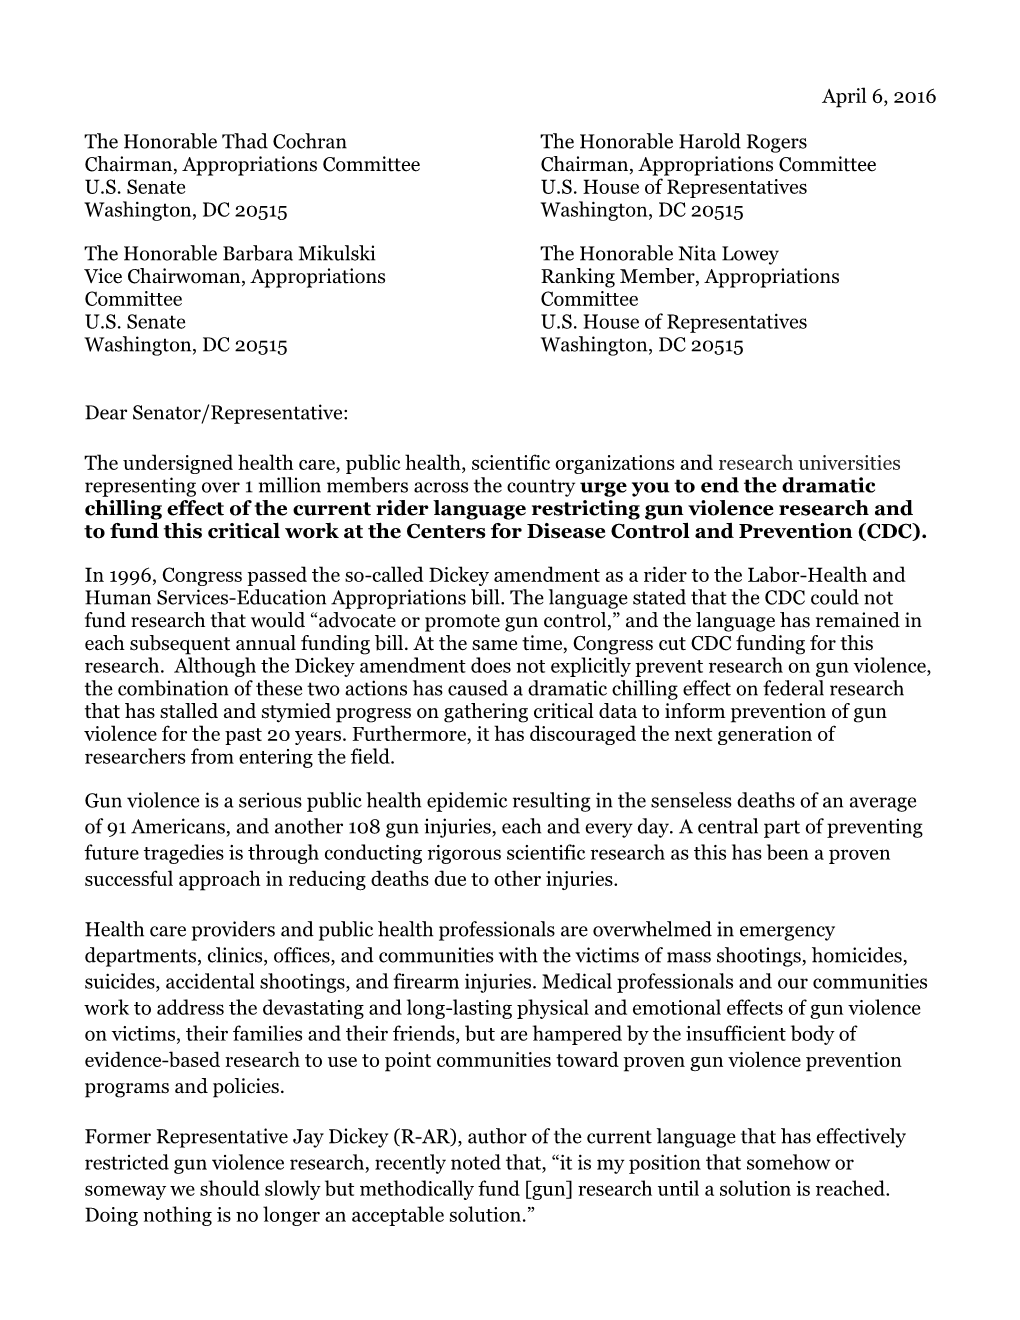 Joint Letter Calling for End to Ban on Gun Violence Research